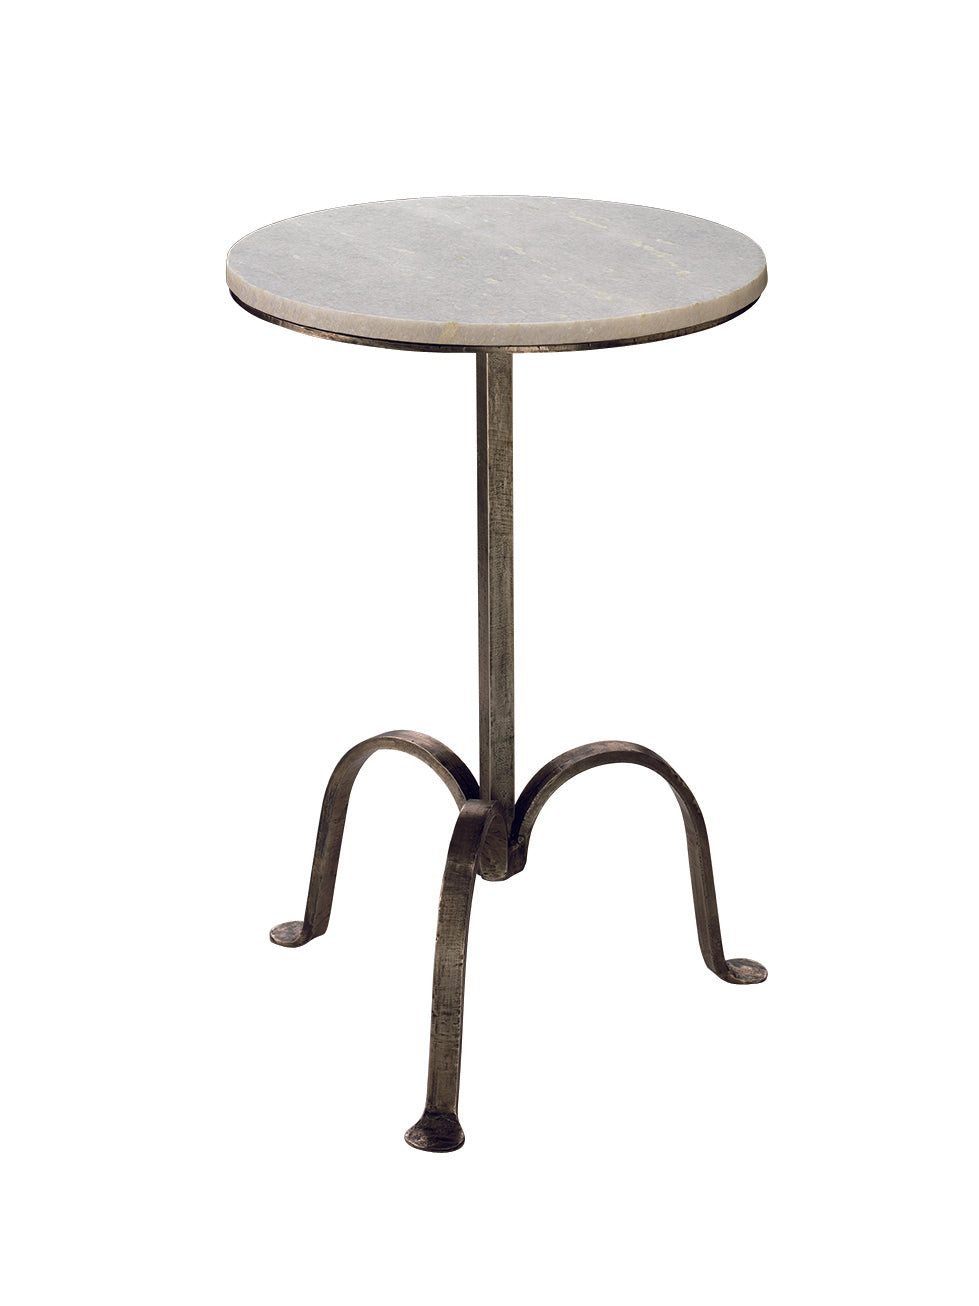 Jamie Young Left Bank Marble Side Table